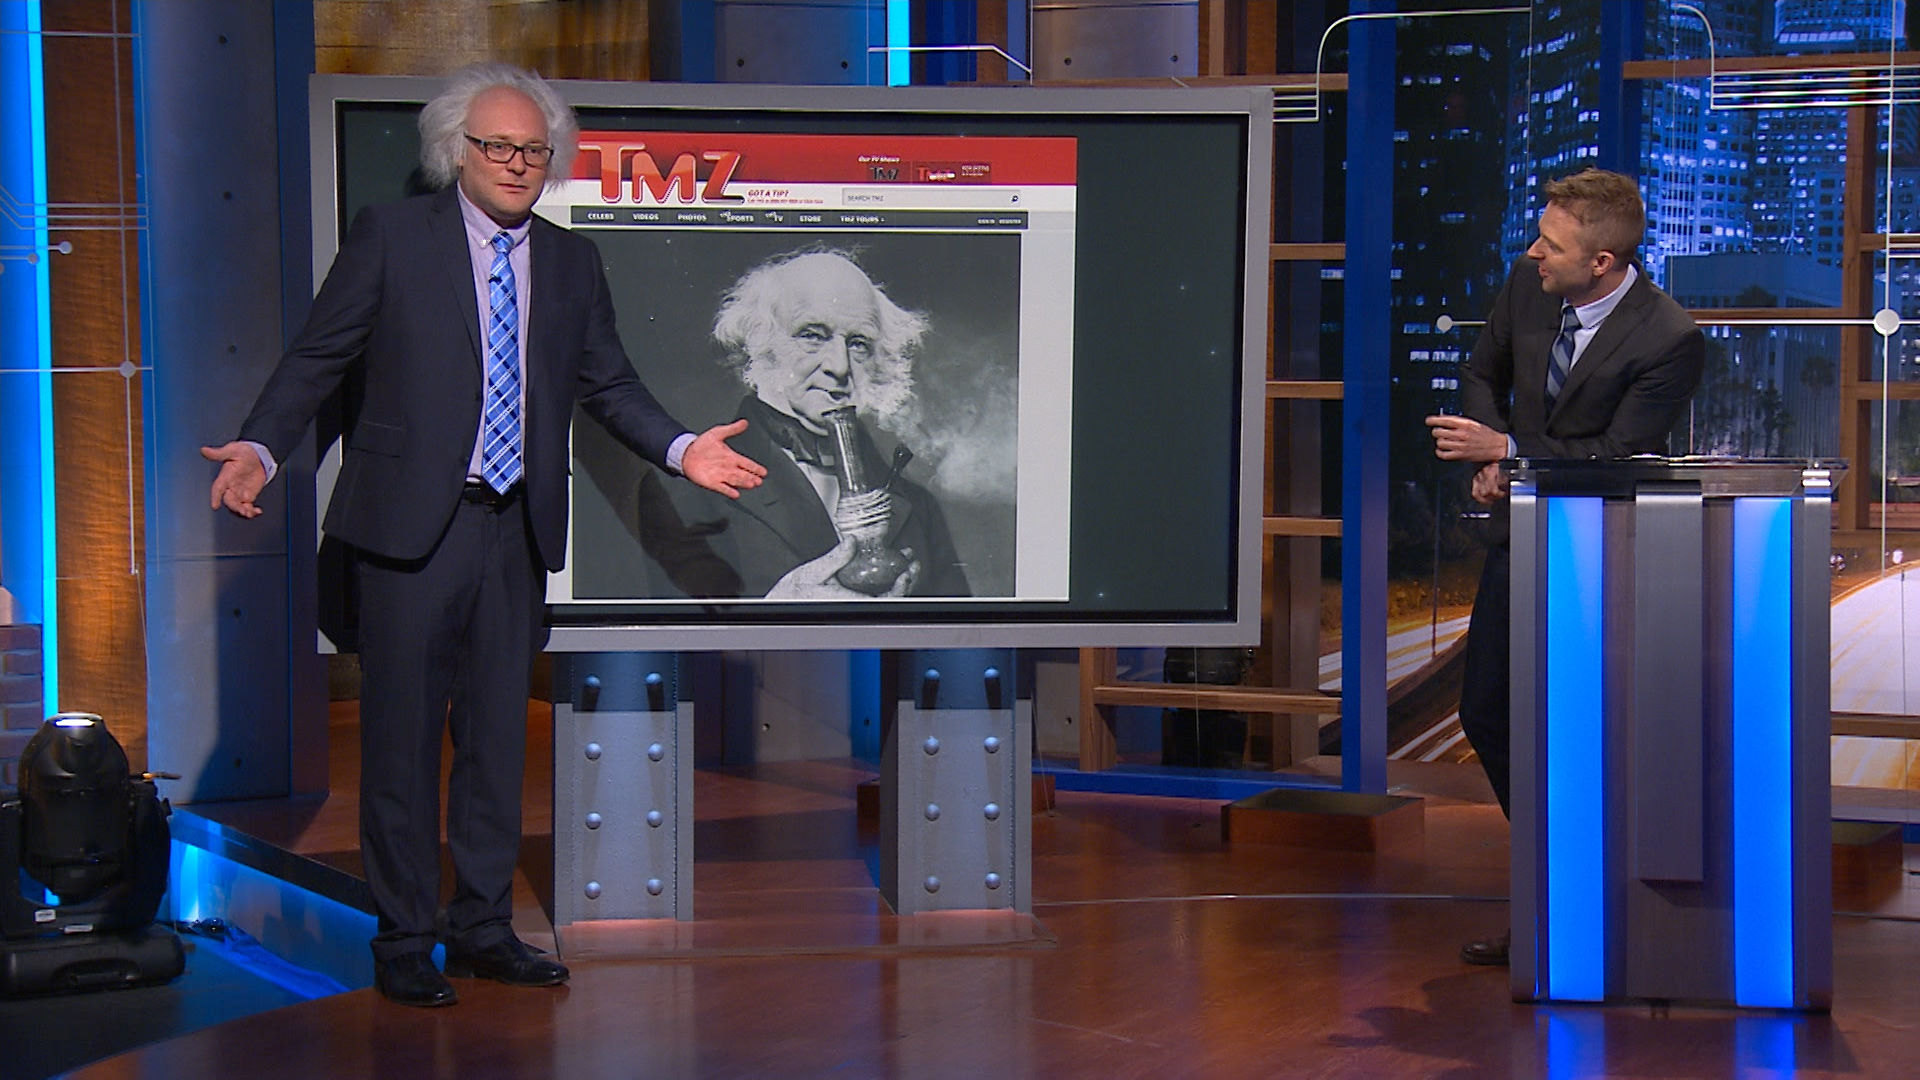 James Adomian’s Bernie Sanders impersonation takes over @midnight